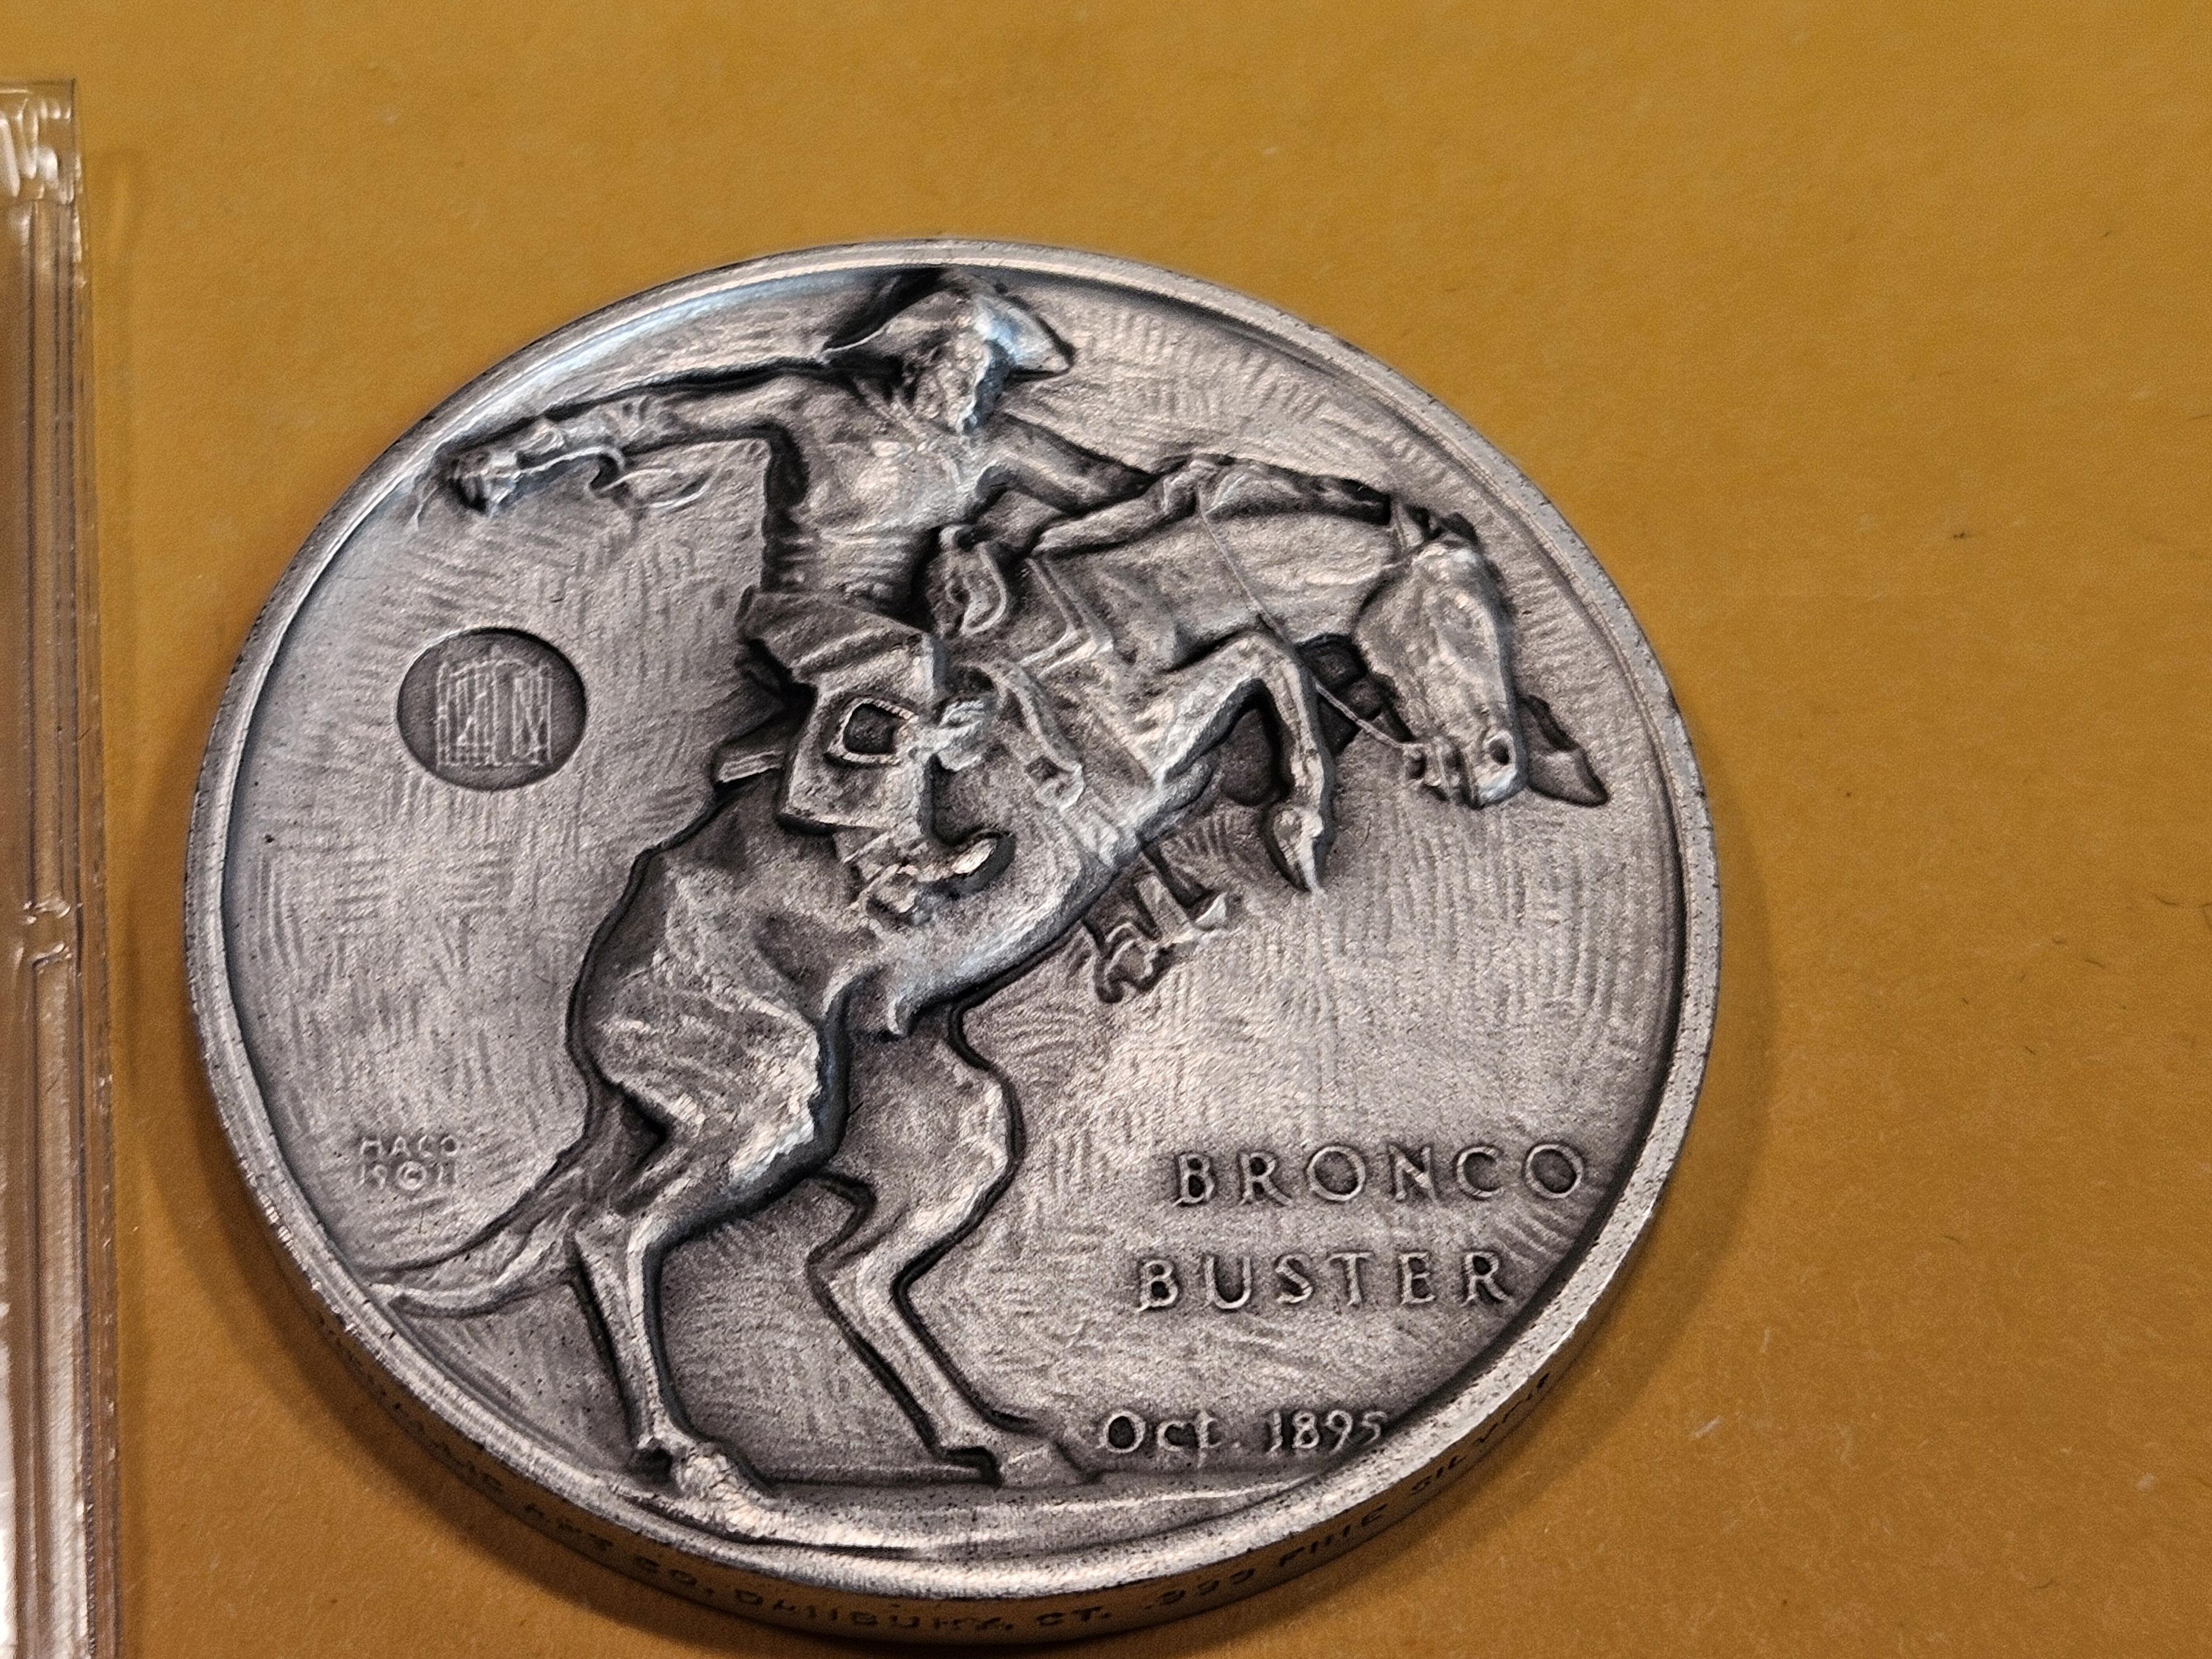 Two Ounce .999 fine silver art high-relief medal